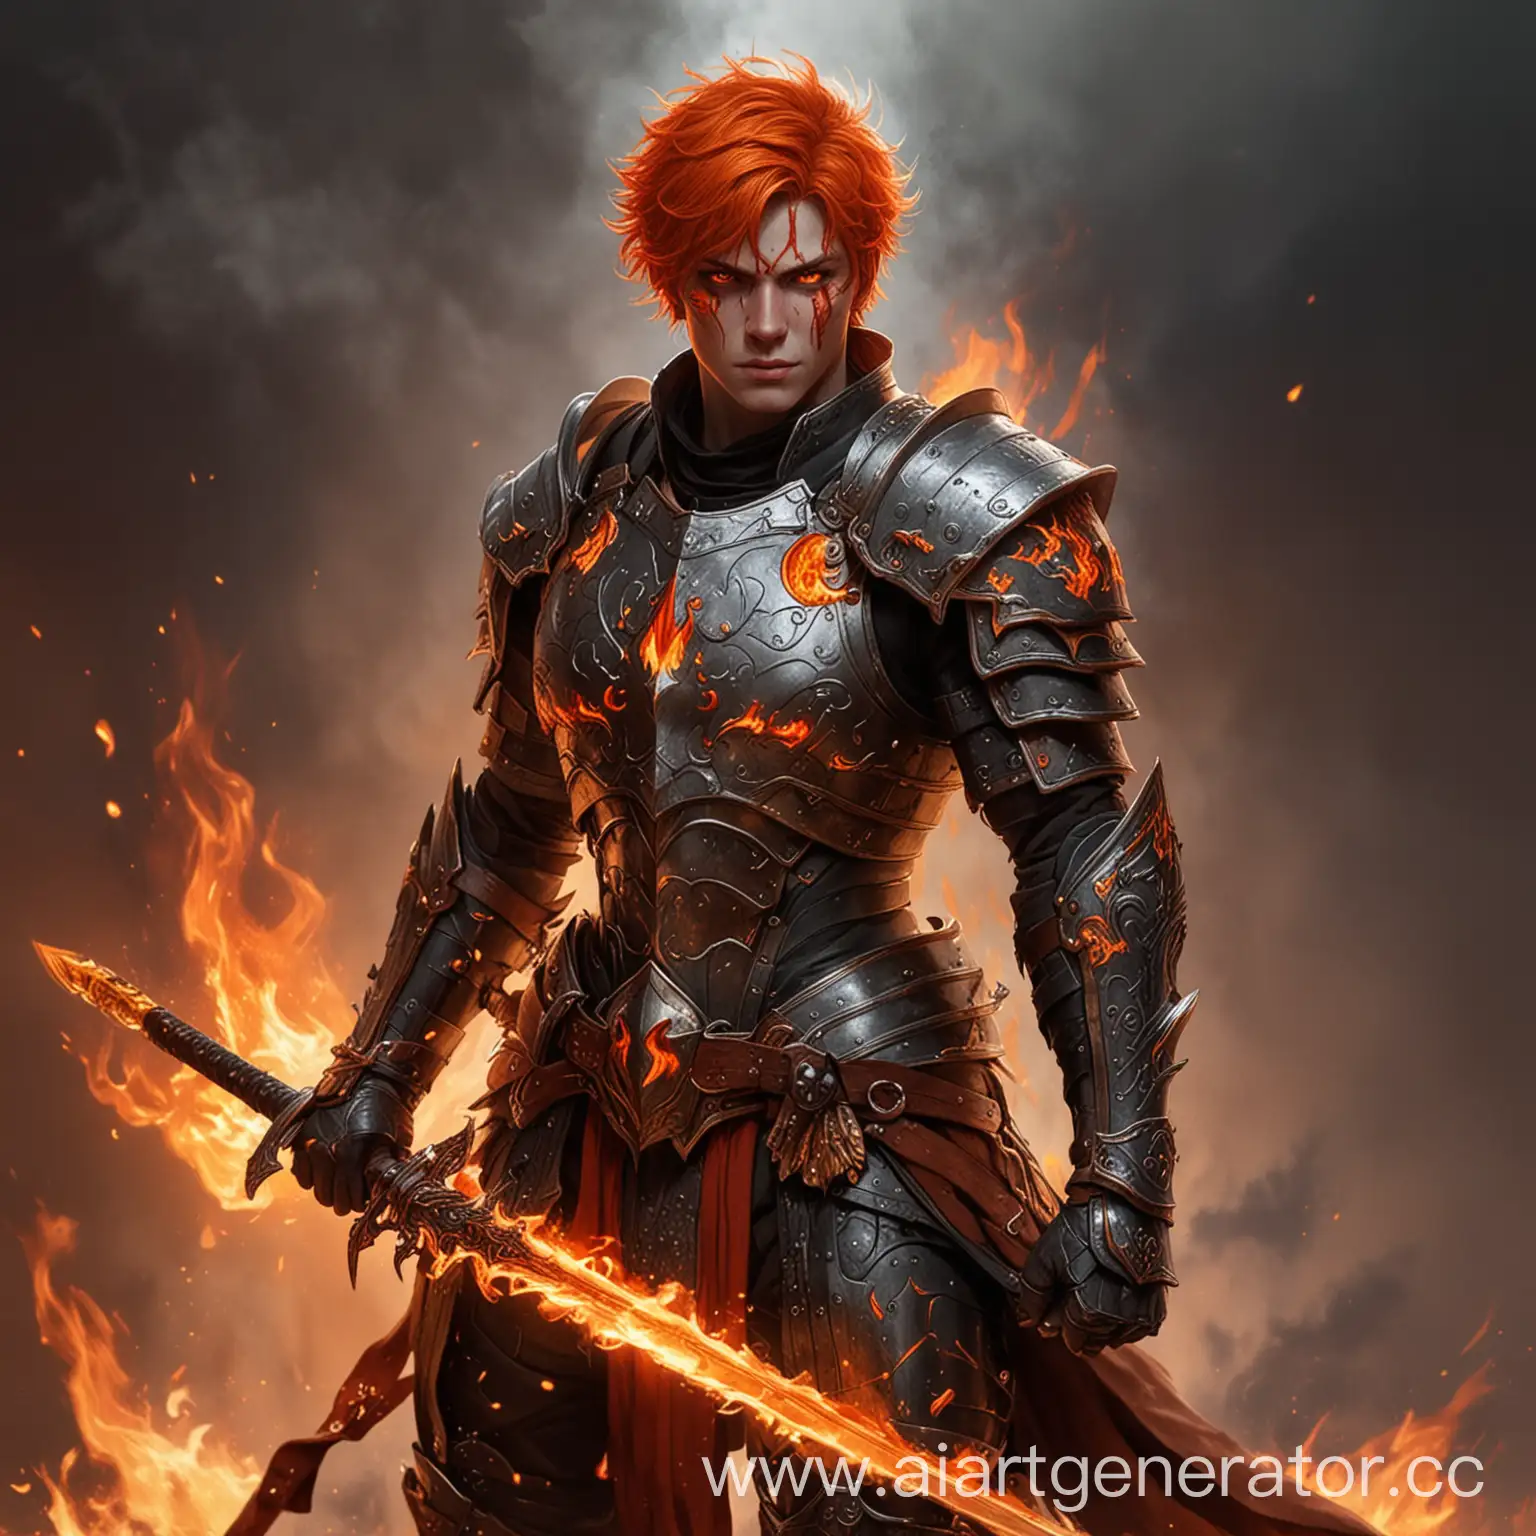 Fiery-Male-Warrior-with-Sword-and-Armor